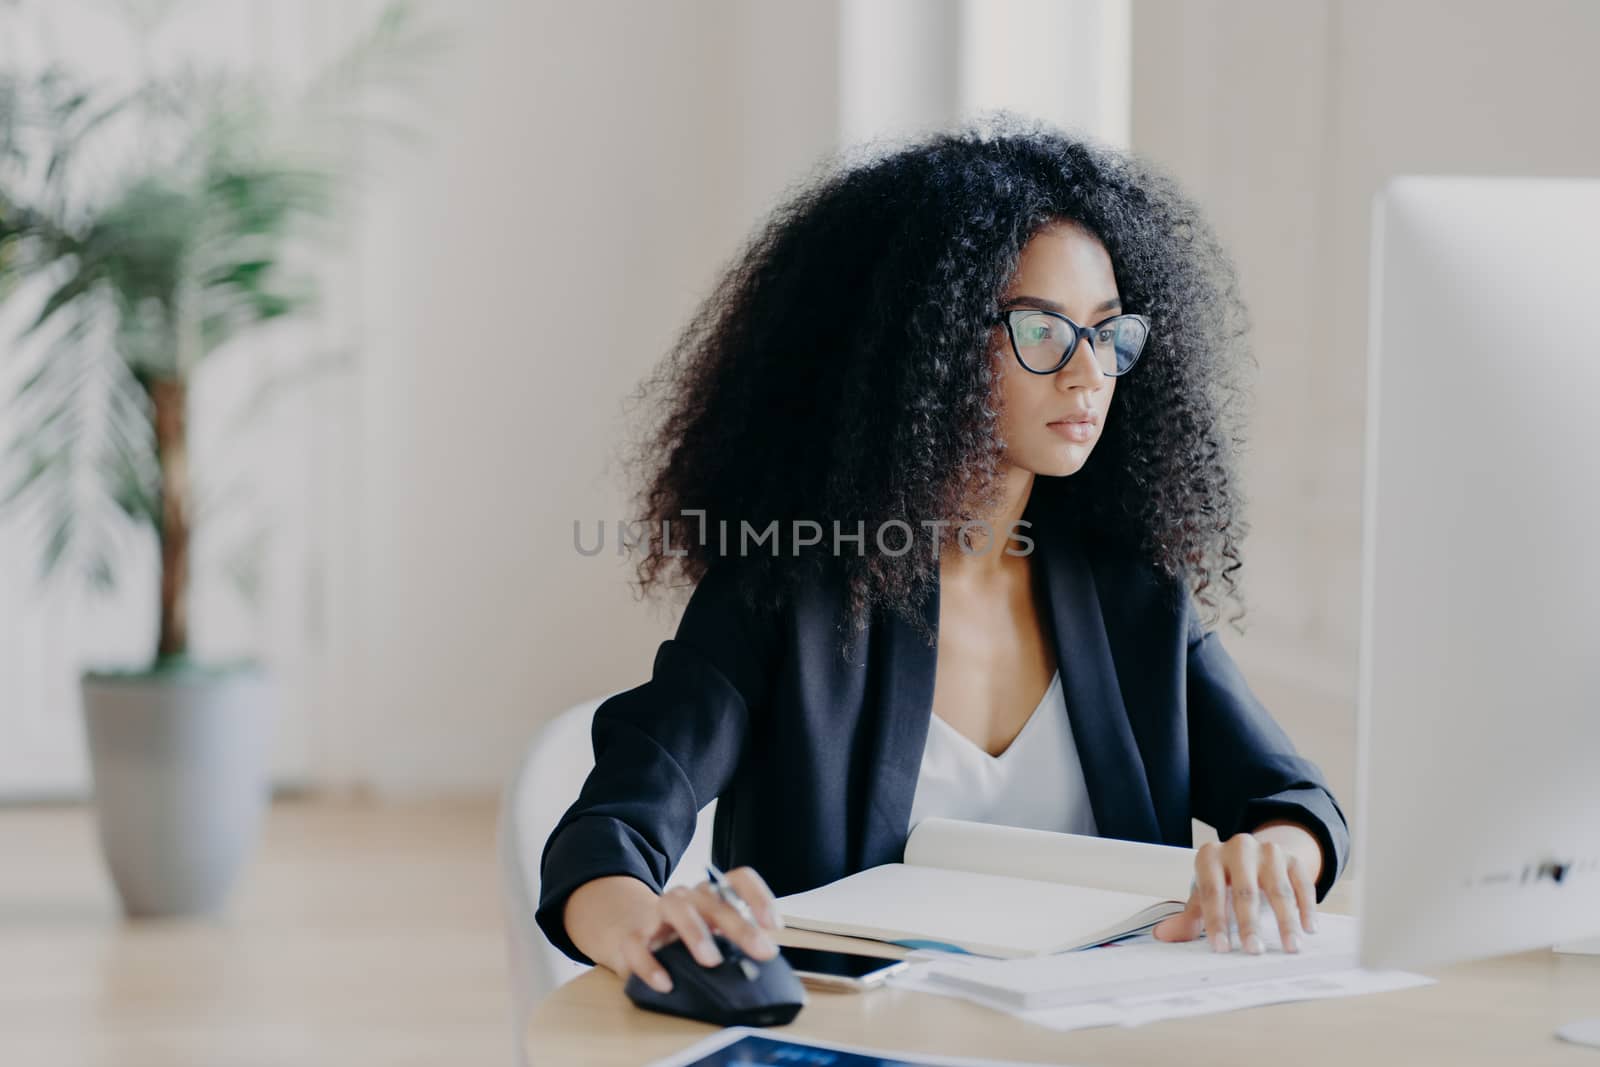 Serious curly businesswoman focused at display of computer, works on making project, surrounded with textbook and papers, wears glasses for vision correction, black suit, poses in office room